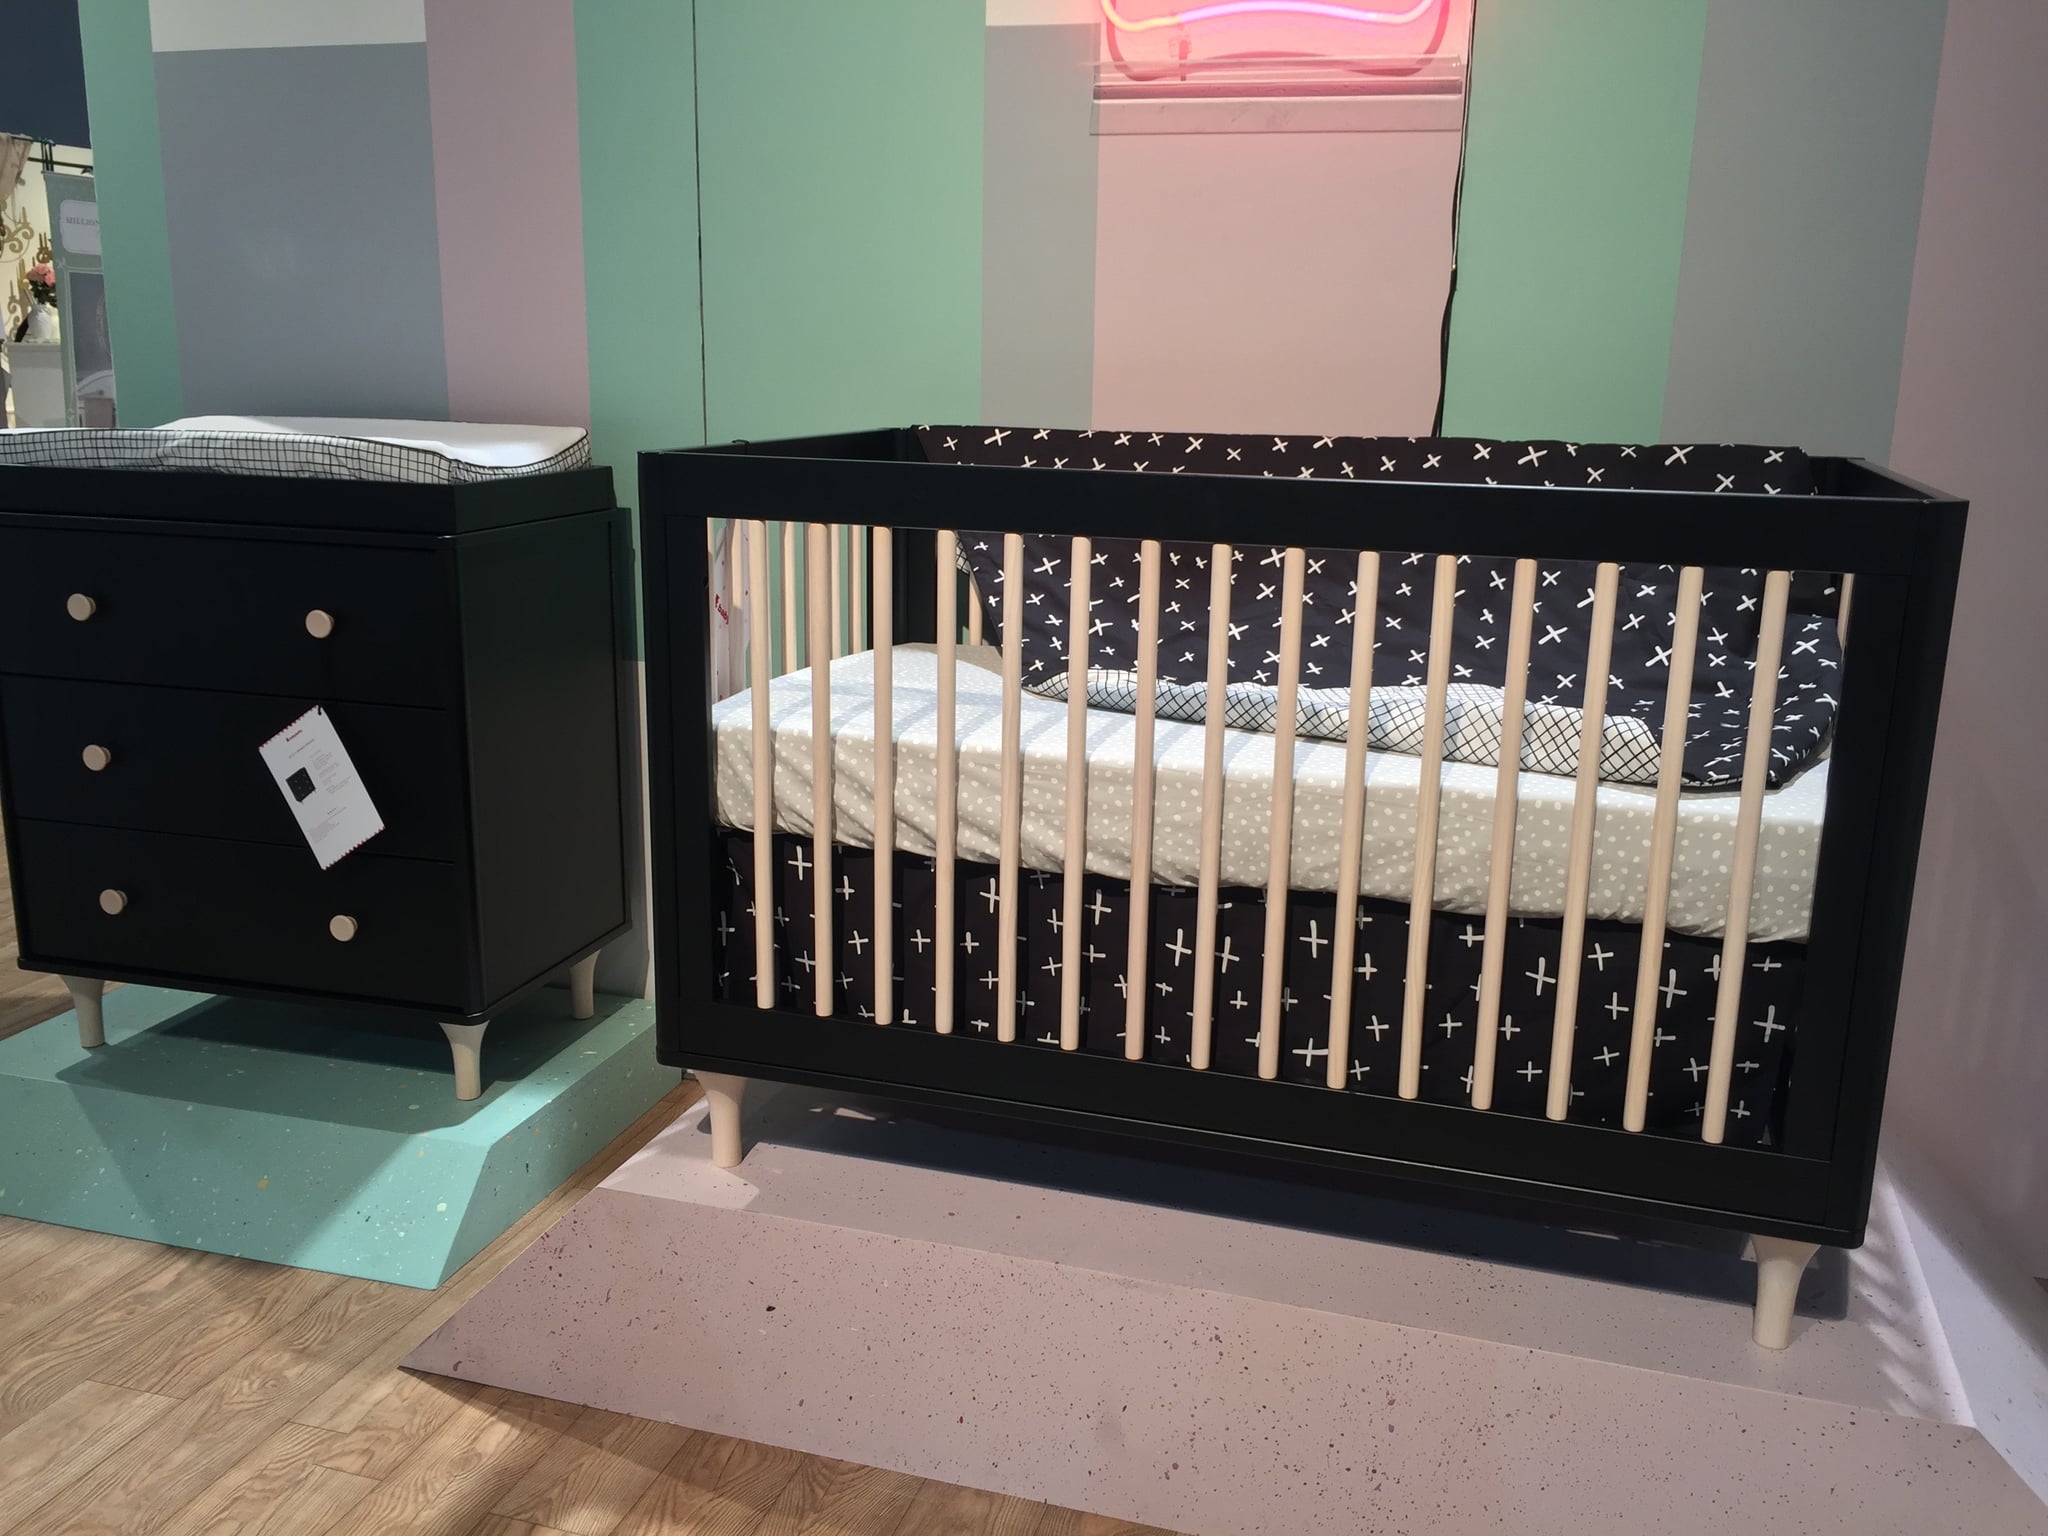 Cybex Marcel Wanders Bouncer, New Kid and Baby Products From ABC Kids Expo  For 2017